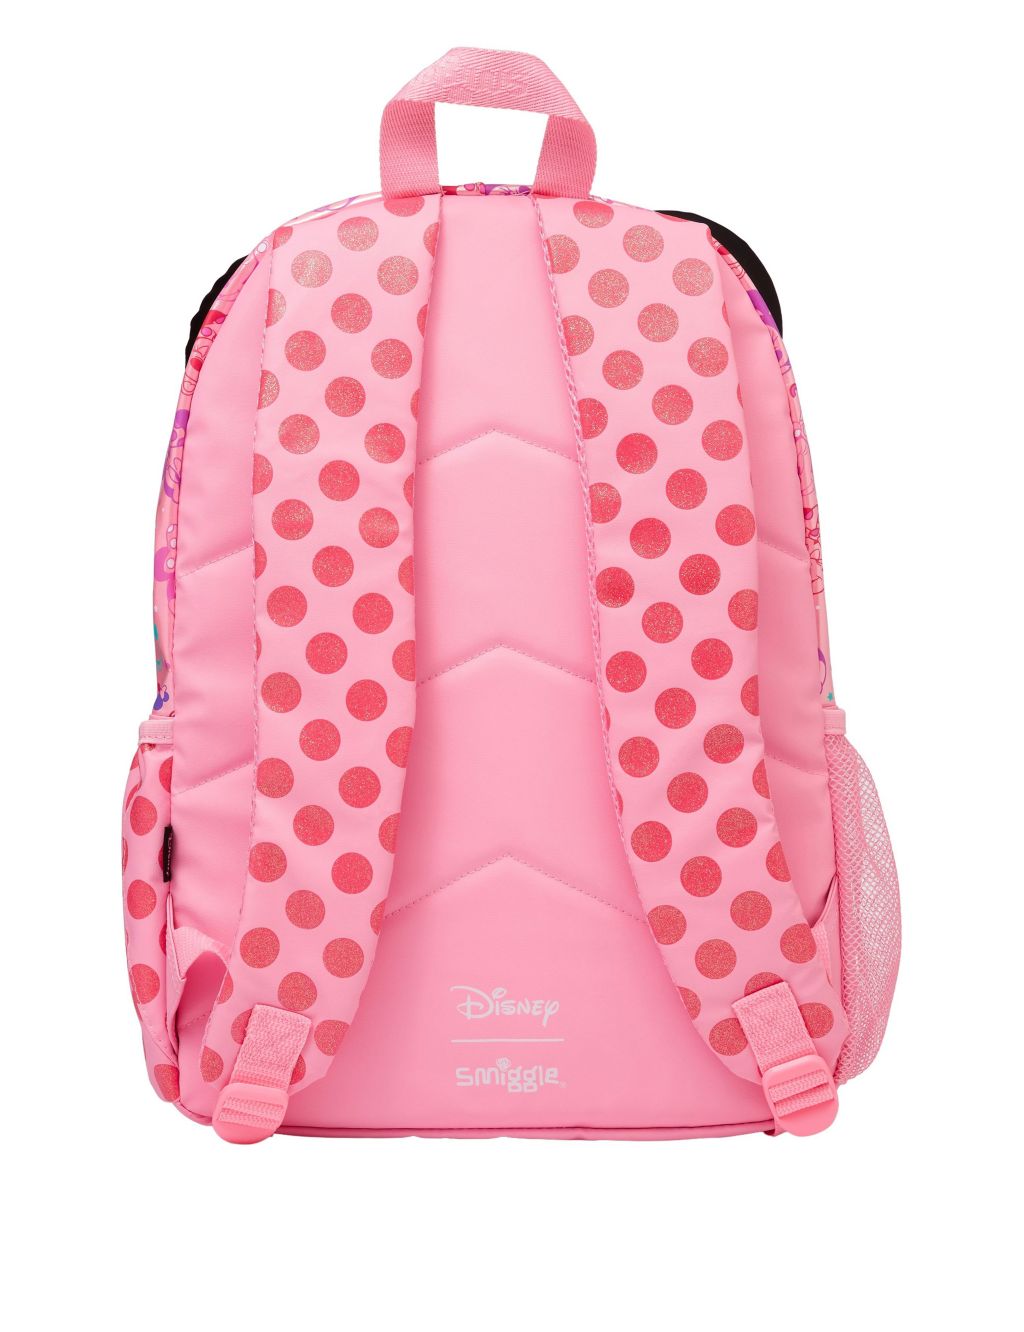 Kids' Minnie Mouse™ Backpack image 3